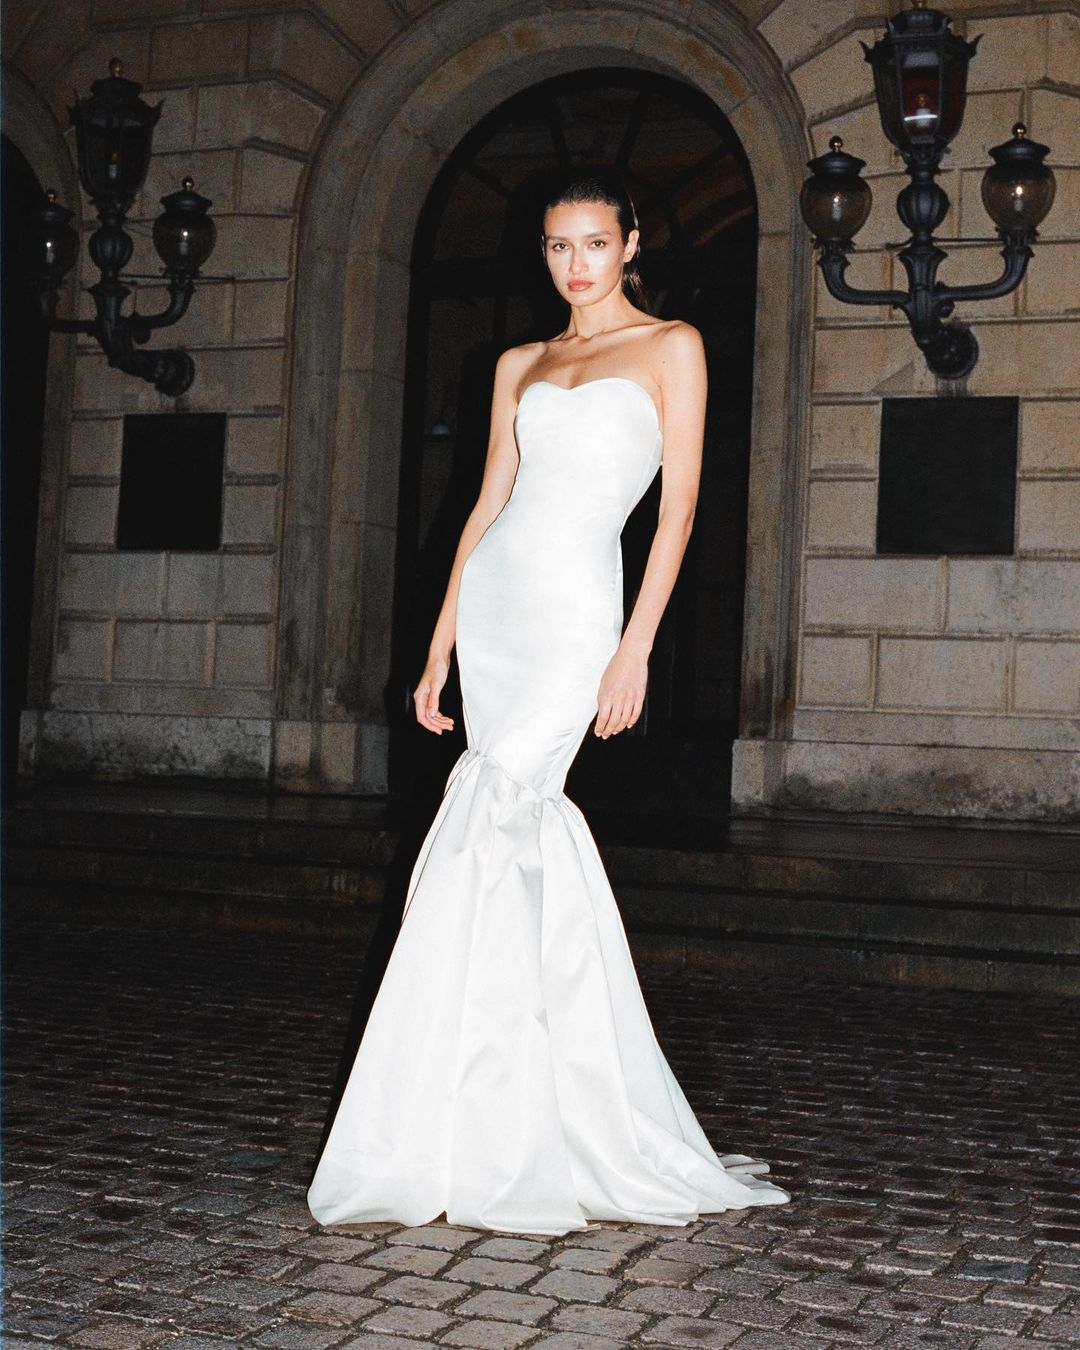 A Gorgeous New Hayley Paige Wedding Dress - Our Wedding Dress of the Day!